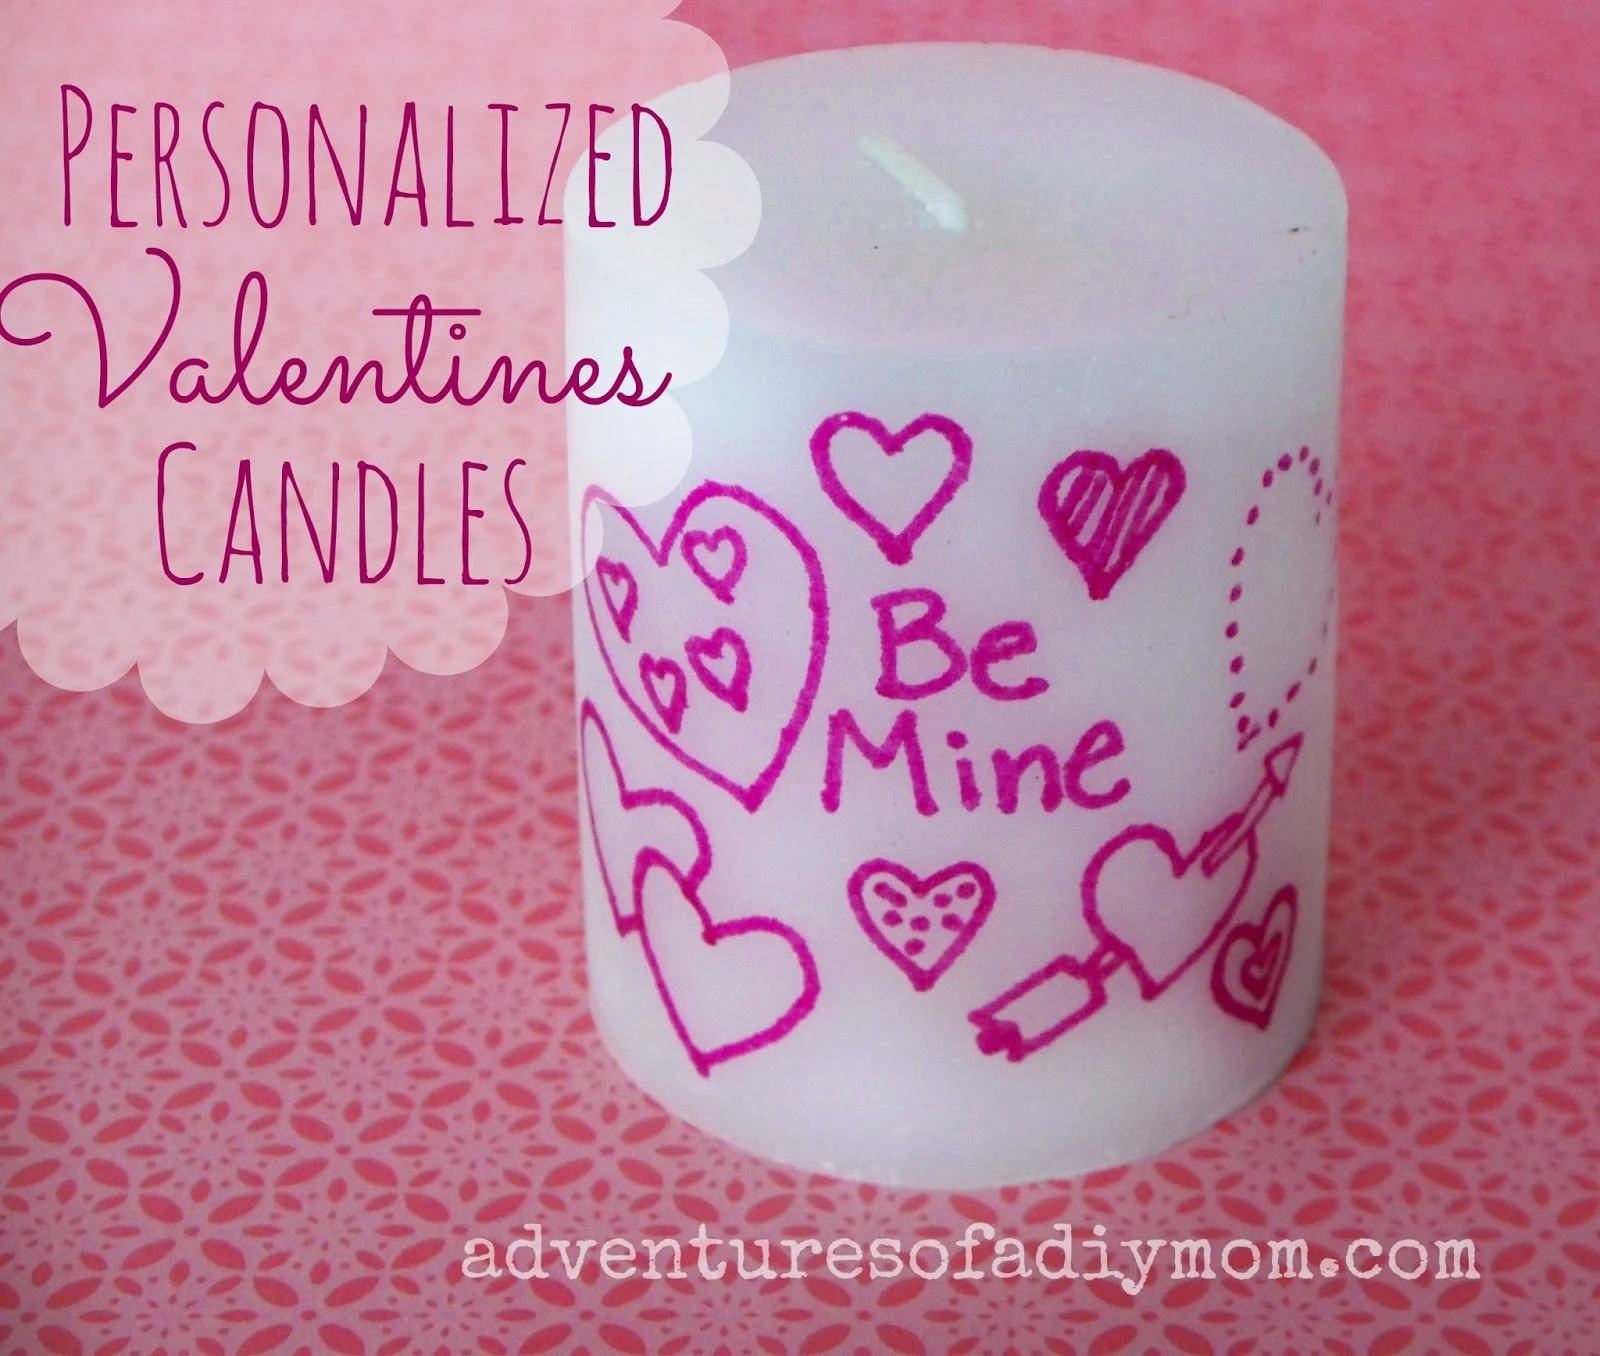 Personalized valentines Candles